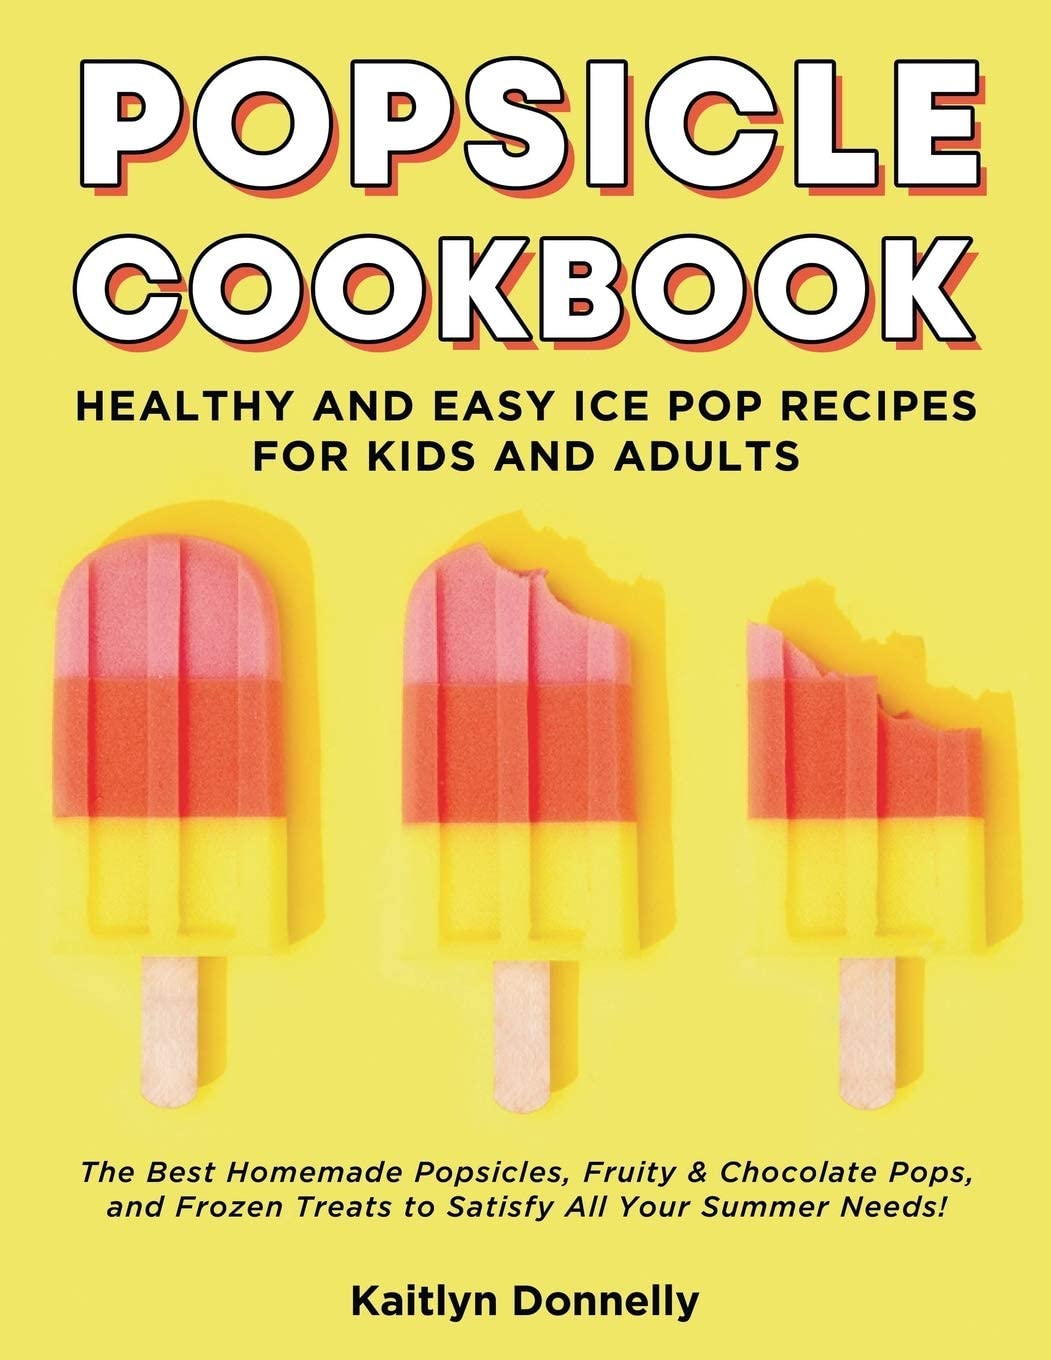 Popsicle Cookbook: Healthy and Easy Ice Pop Recipes for Kids and Adults. The Best Homemade Popsicles, Fruity & Chocolate Pops, and Frozen Treats to Satisfy All Your Summer Needs!